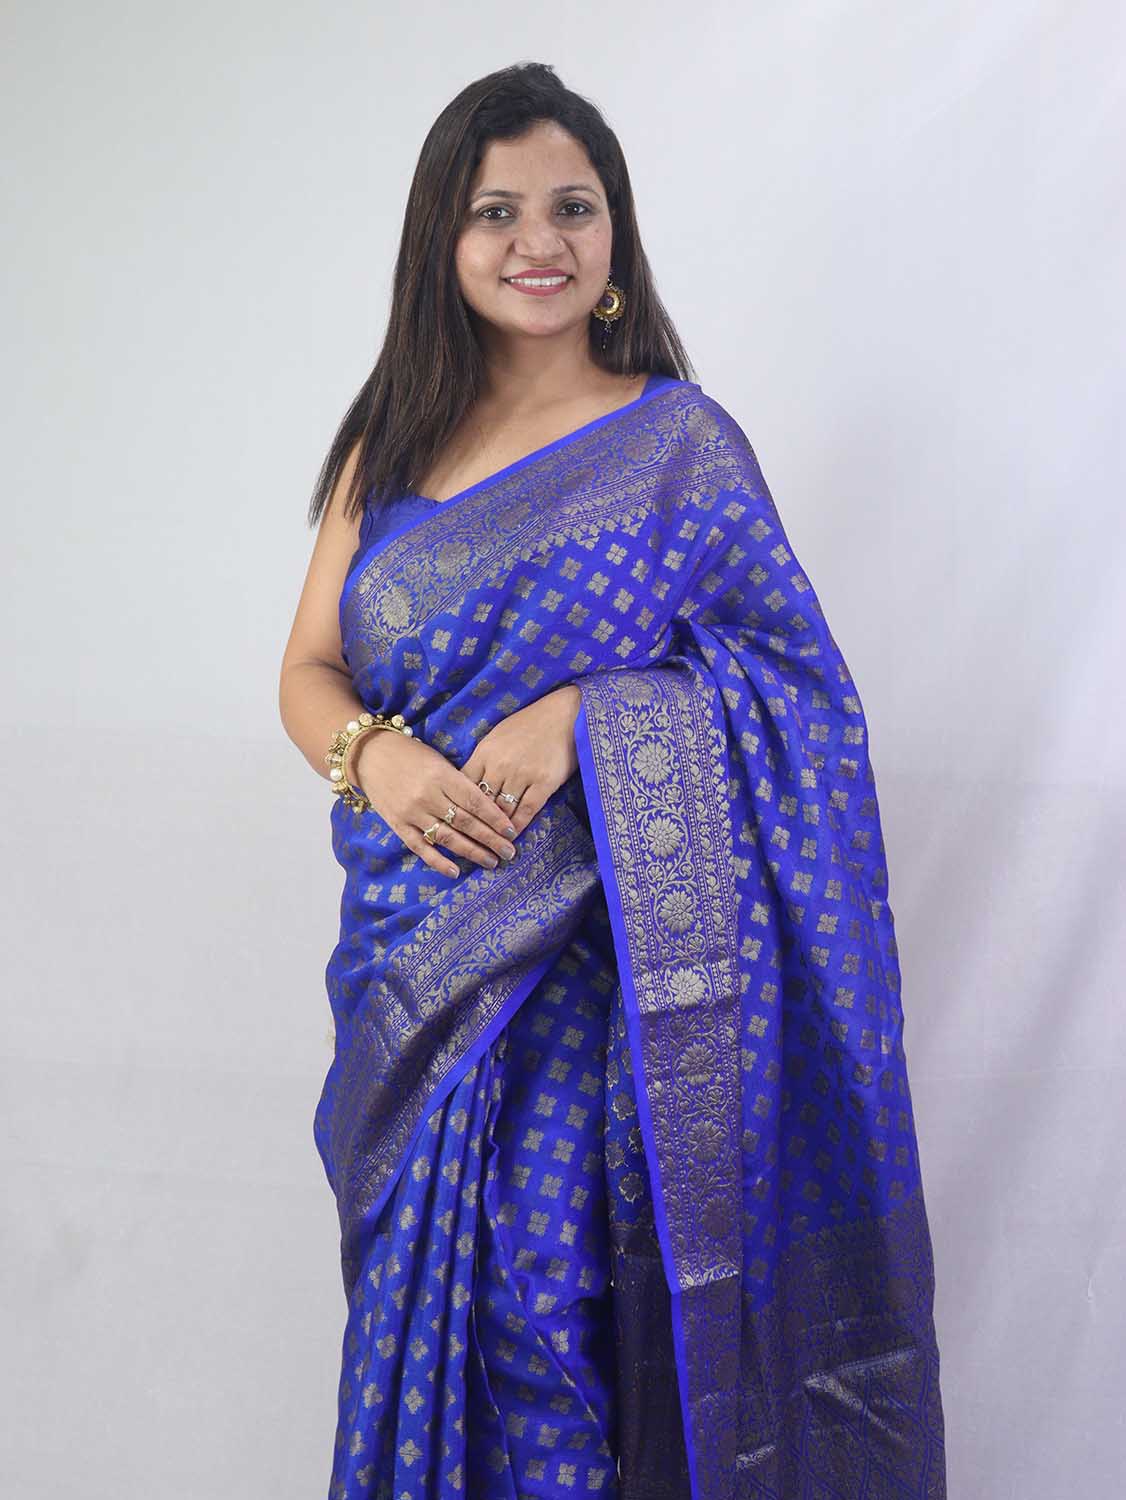 Exquisite Blue Banarasi Silk Saree - Perfect for Any Occasion - Luxurion World